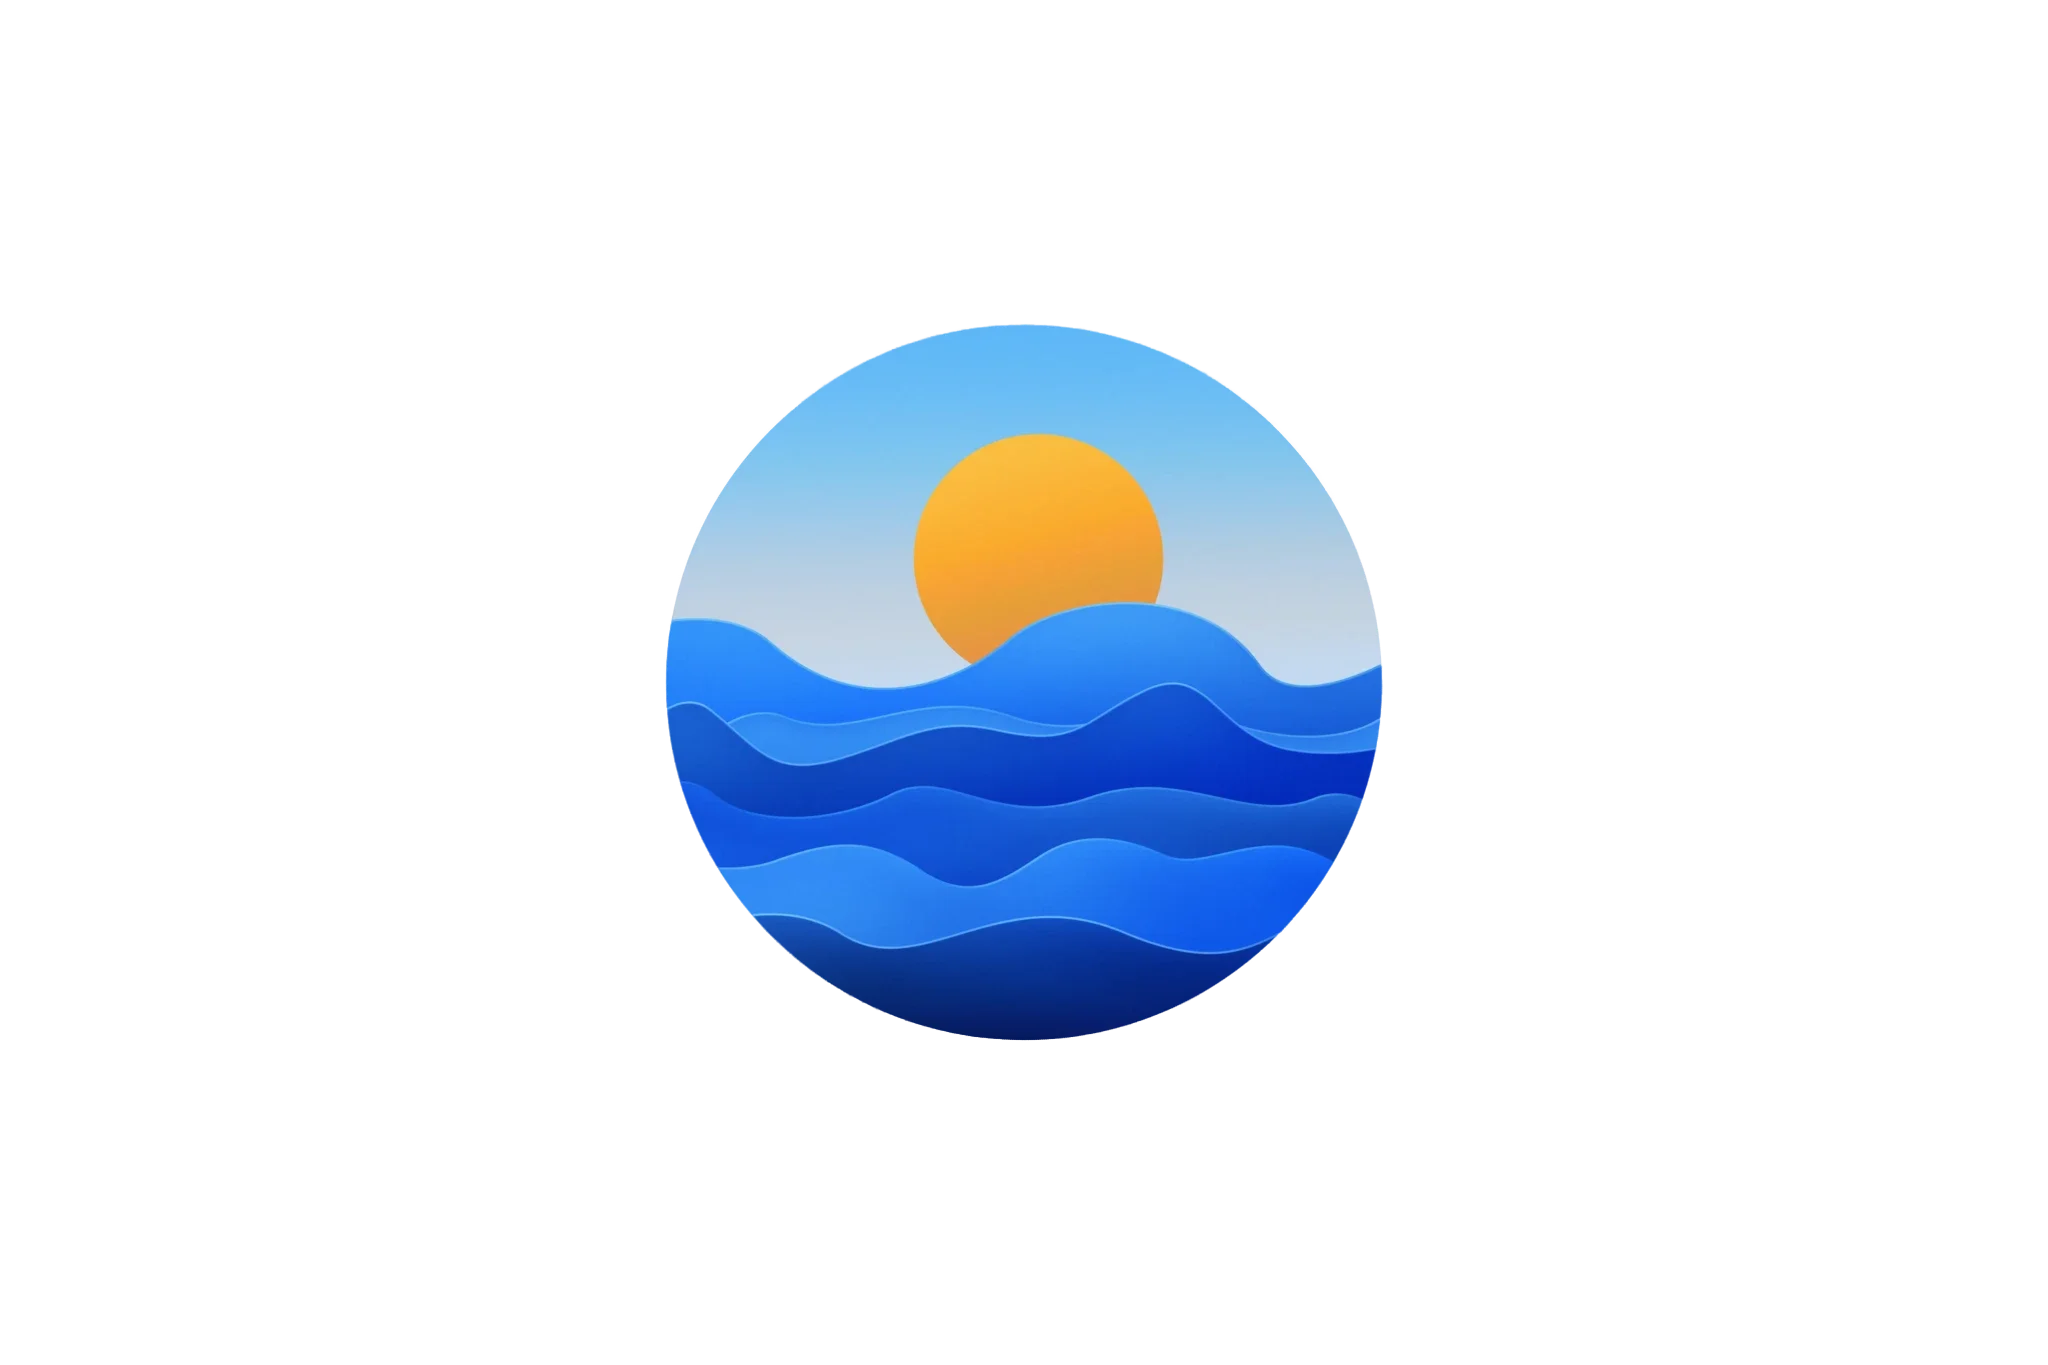 The same sunset logo without a background